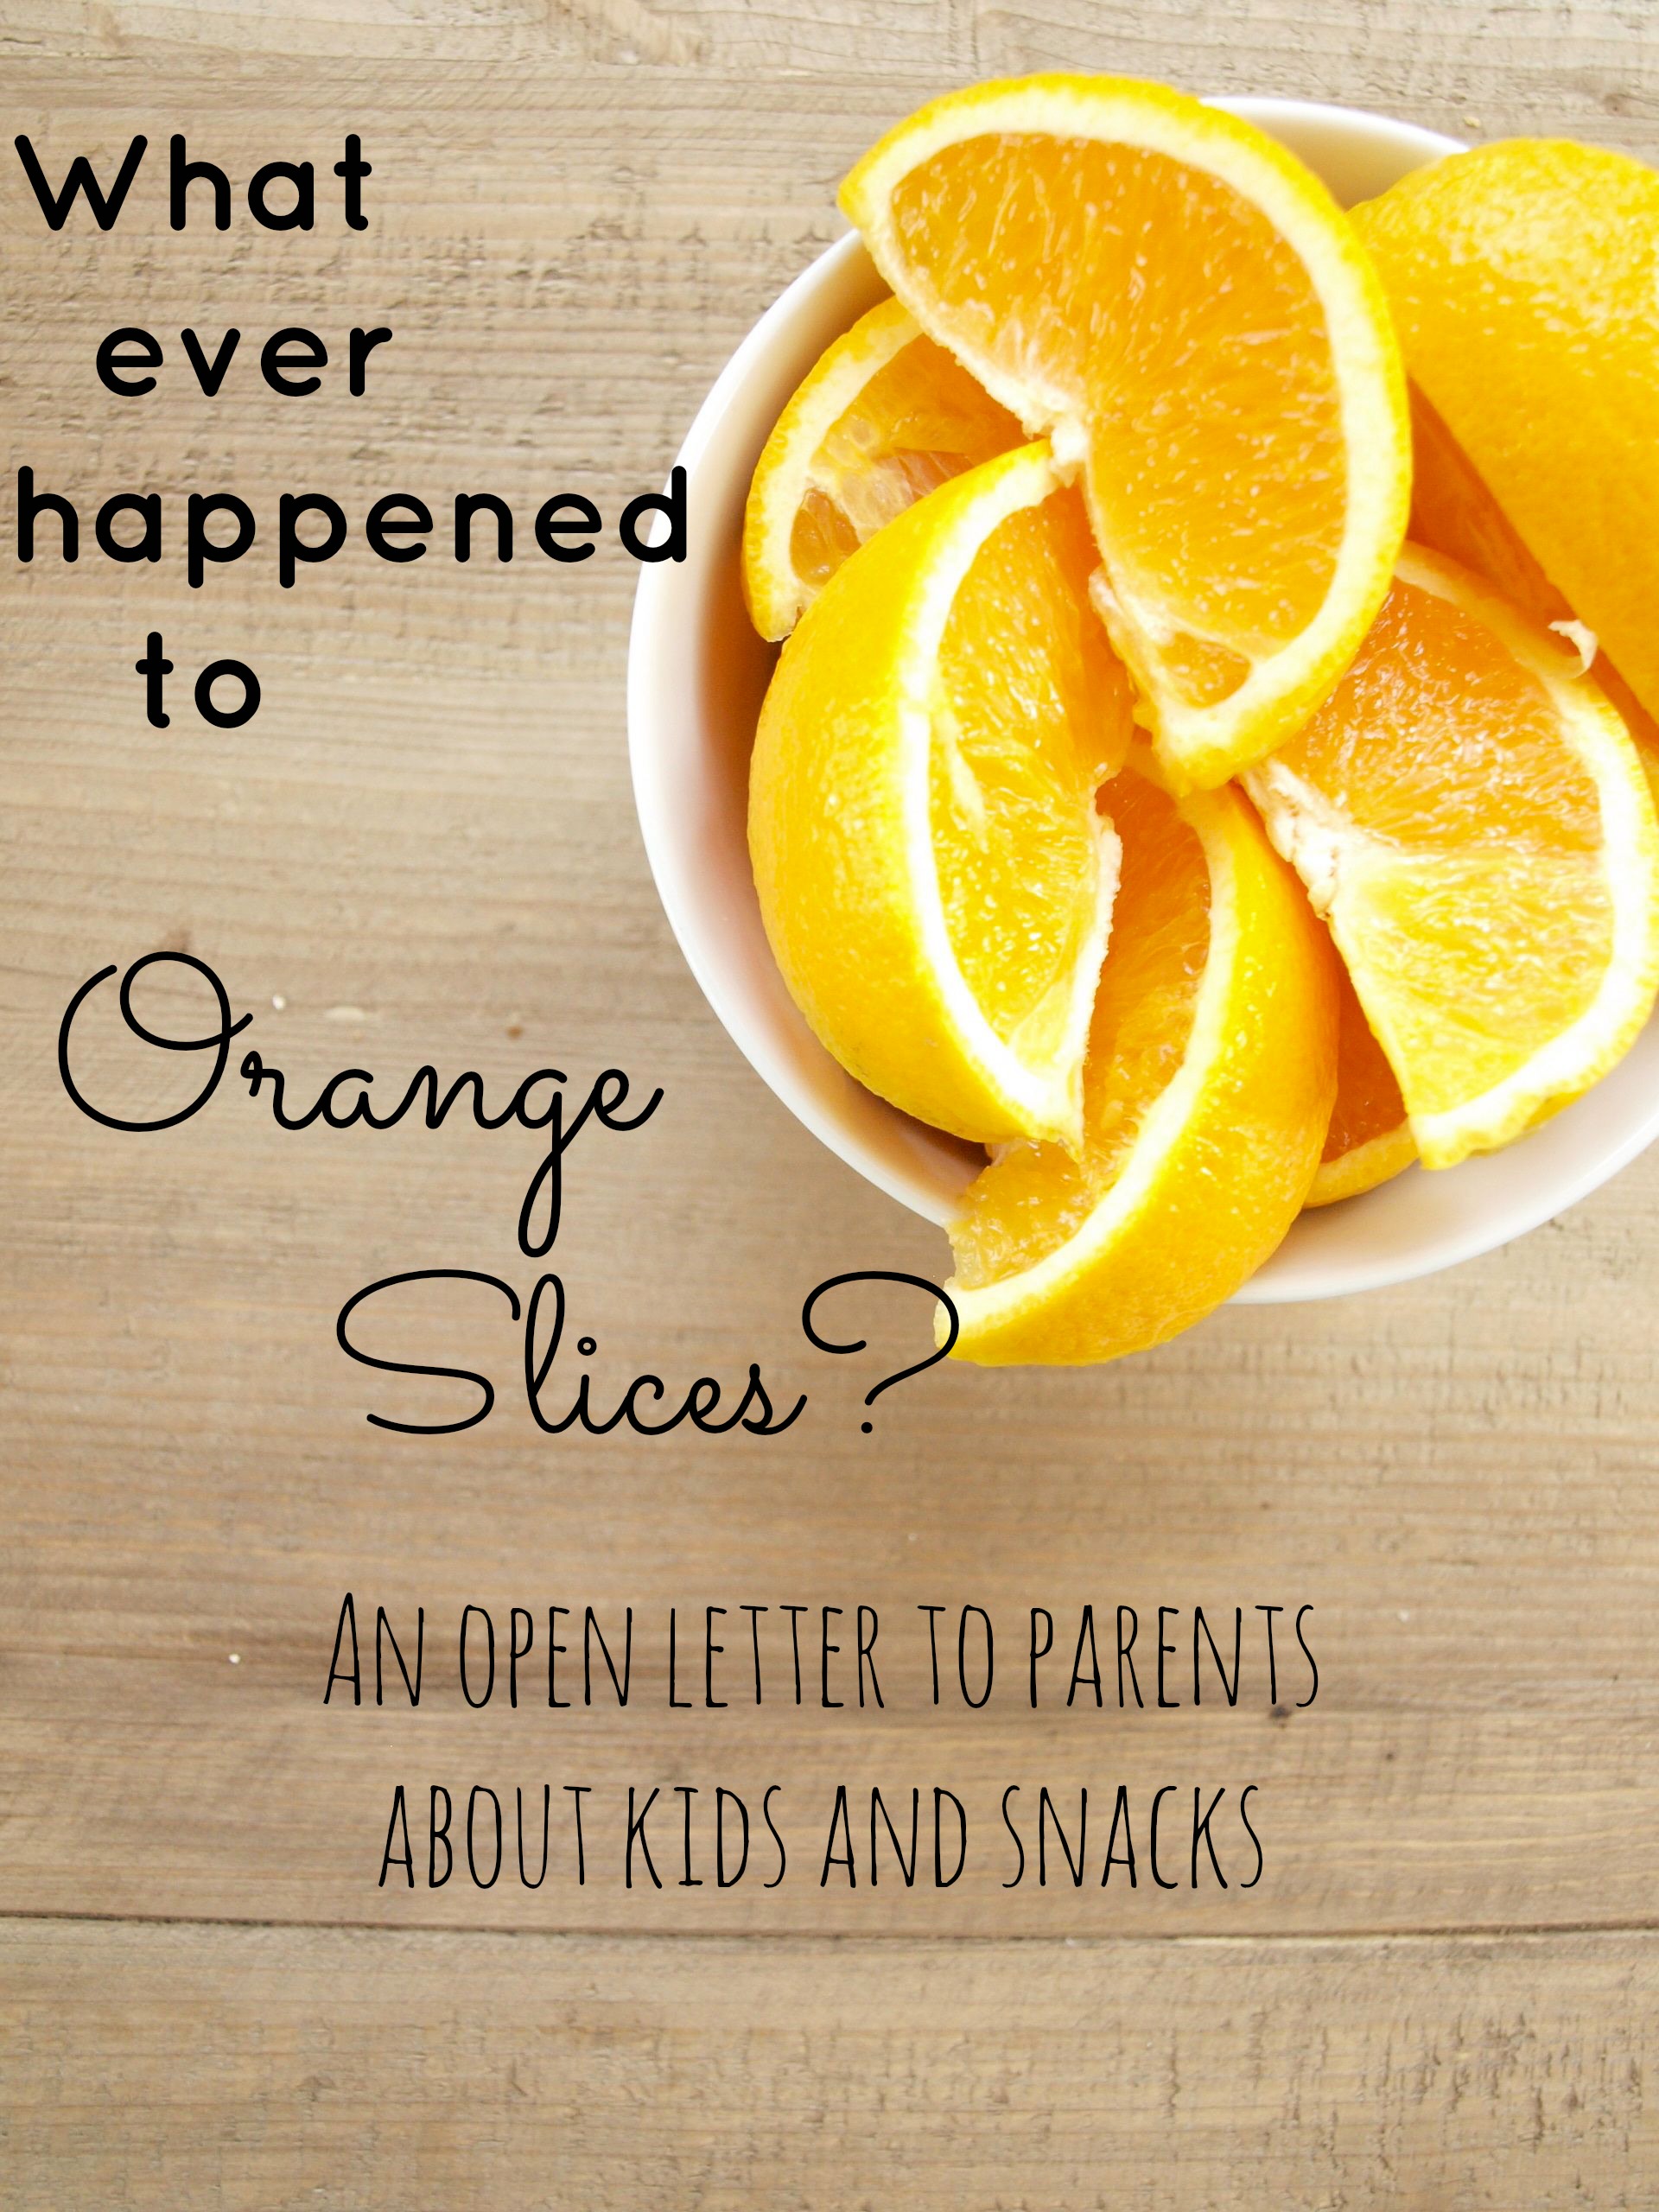 What ever happened to orange slices? An open letter to parents about ...